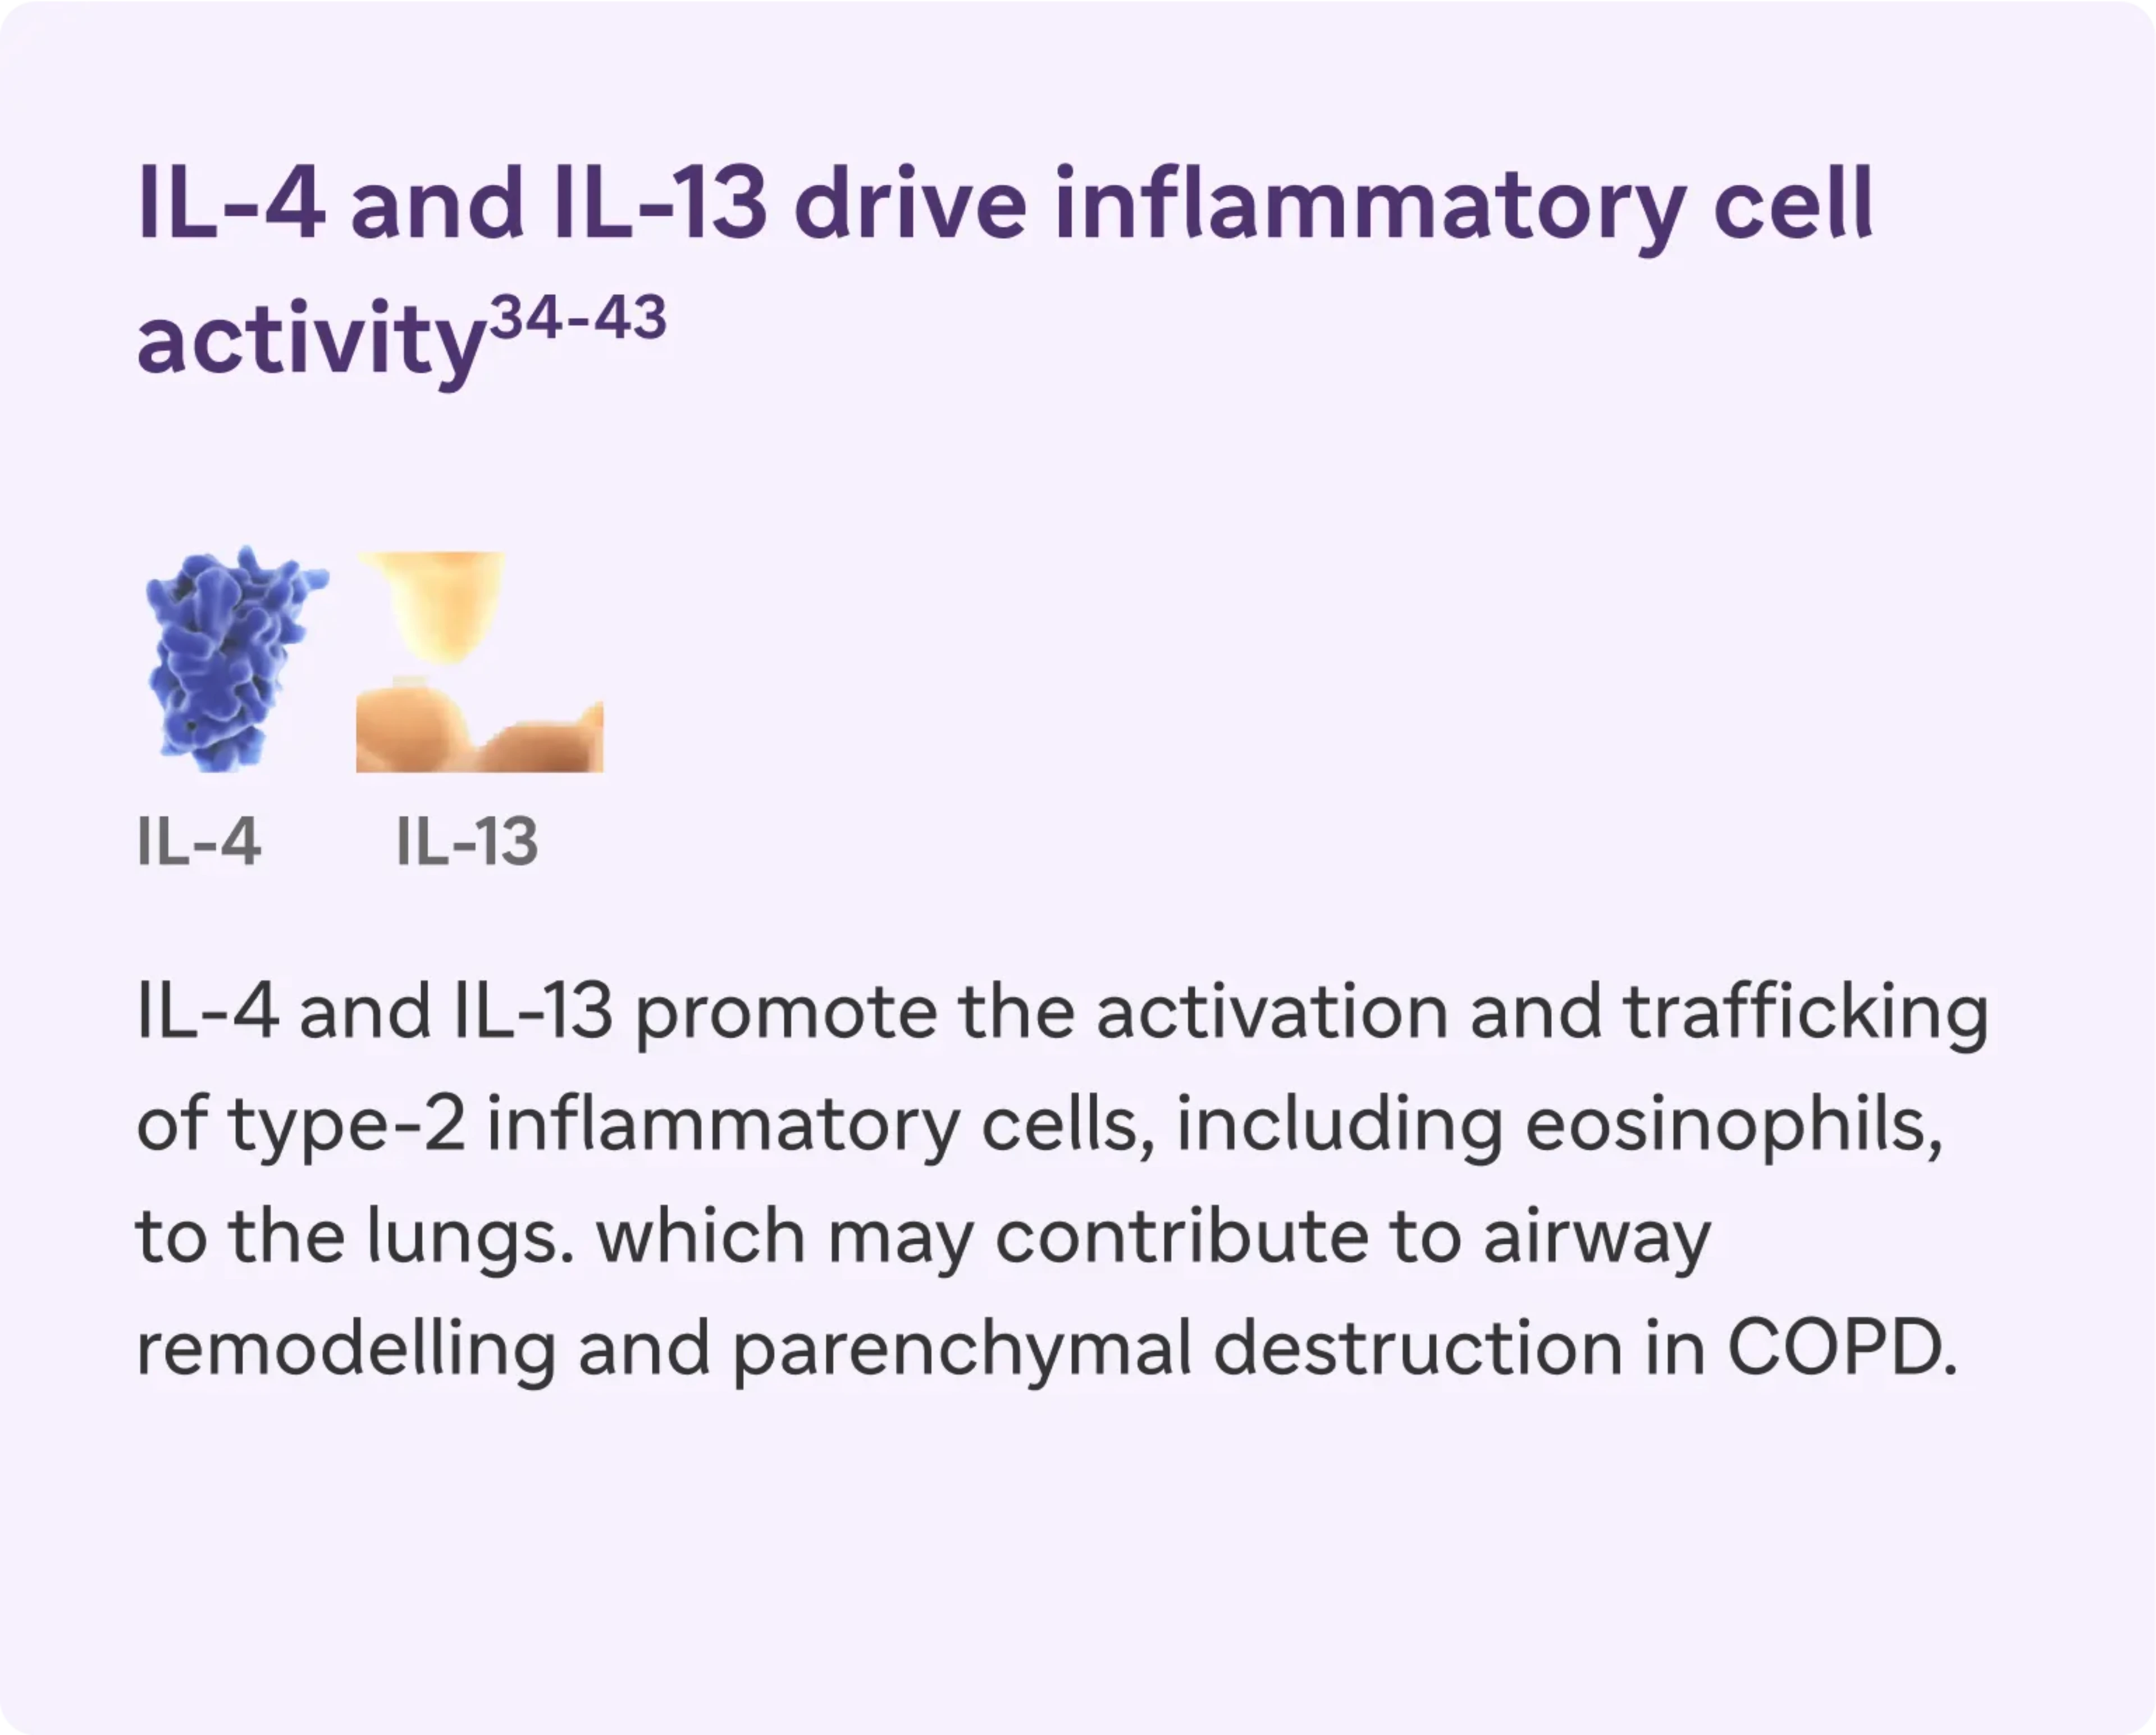 IL-4 and IL-13 promote the activation and trafficking of type-2 inflammatory cells, including eosinophils, to the lungs.